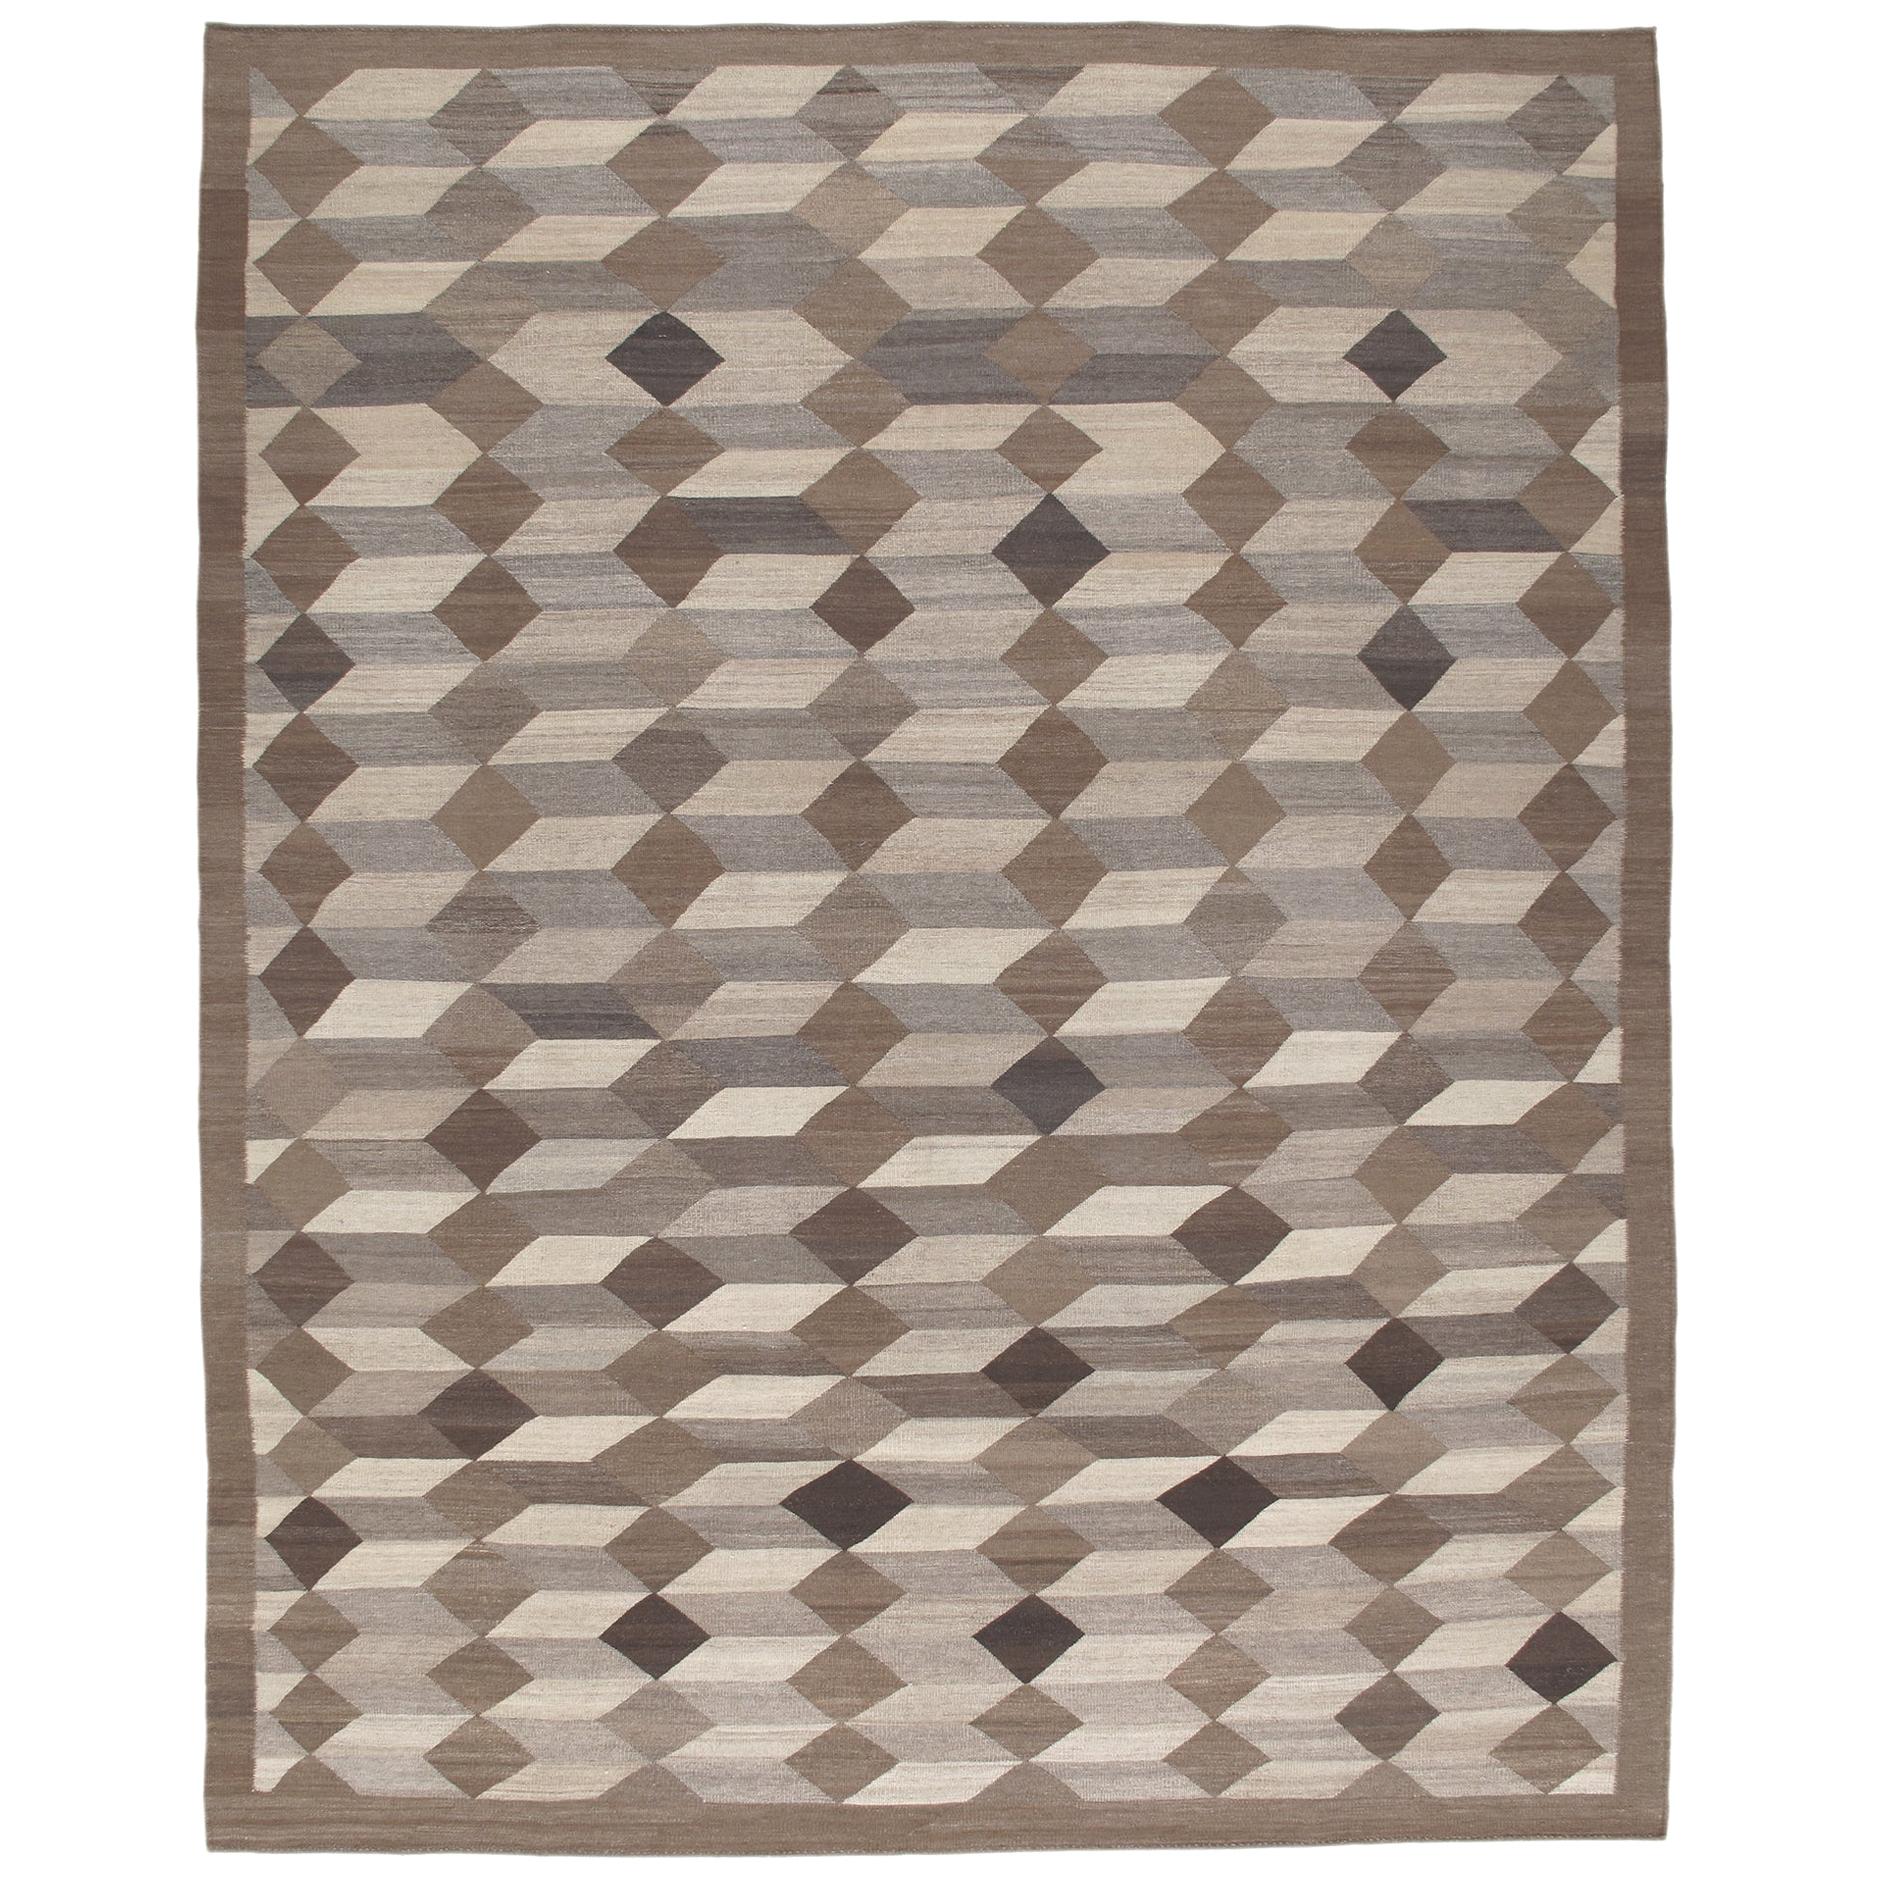 Modern Shiraz Handwoven Flatweave Cube Design Rug in Natural and Brown Colors